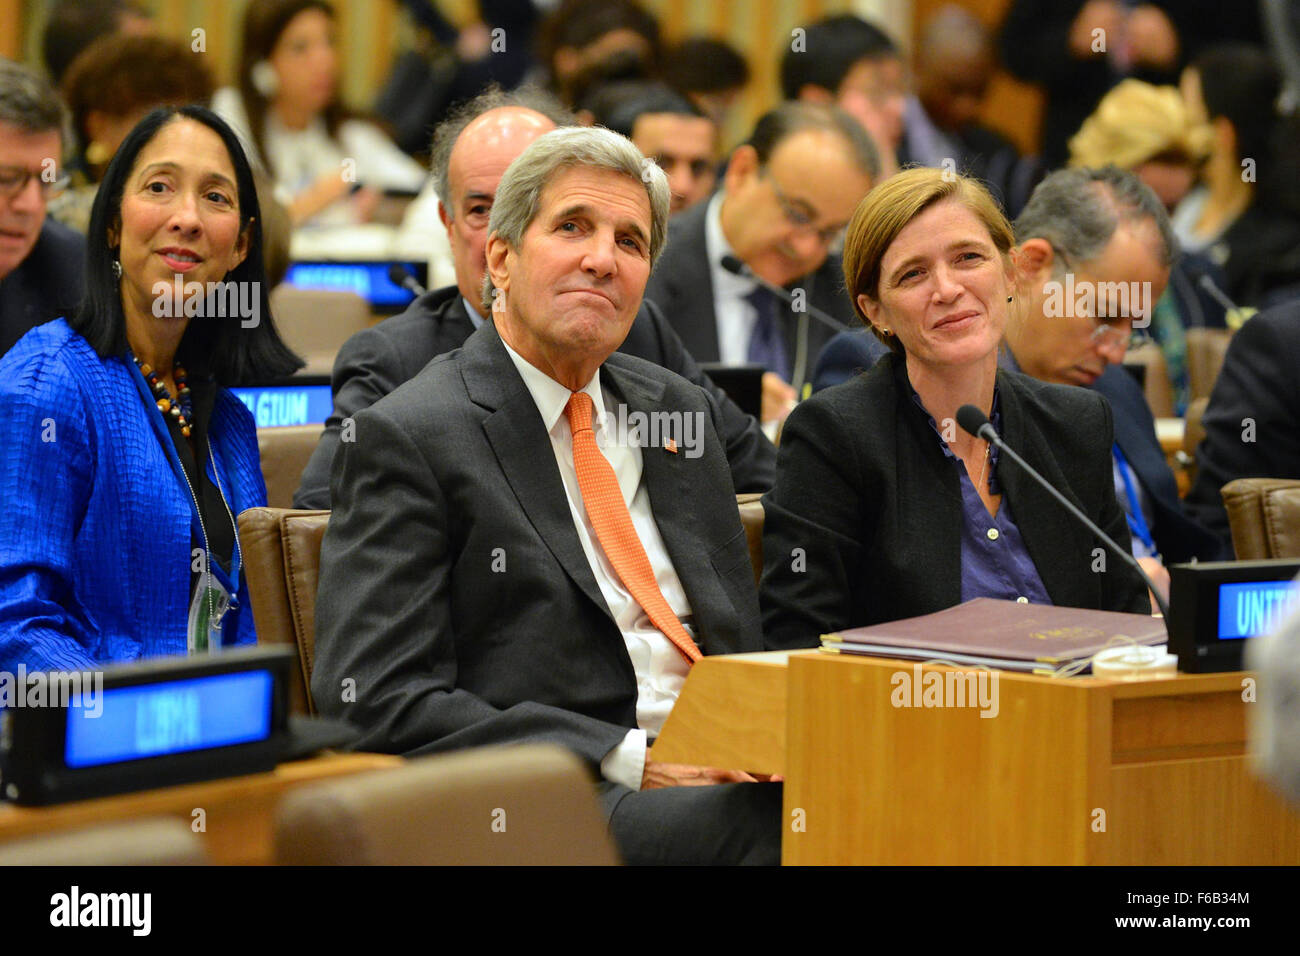 Secretary Kerry and Ambassador Power Participate in the High-Level Ministerial on Libya at the UN in New York City Stock Photo